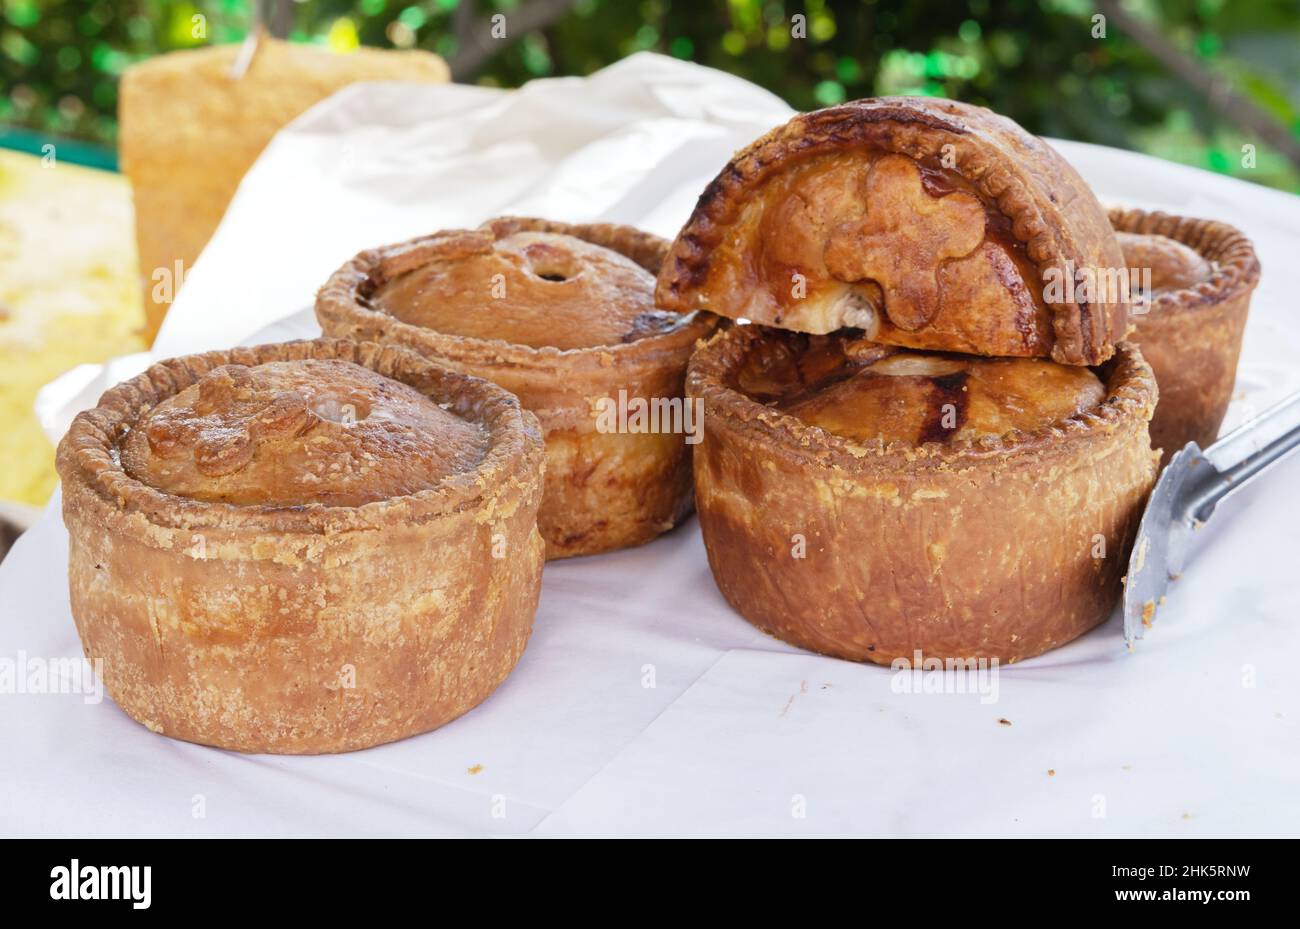 Home cooked Pork Pie; Several homemade pork pies on a table - traditional english food, but unhealthy diet to eat in excess, Hertfordshire England UK Stock Photo